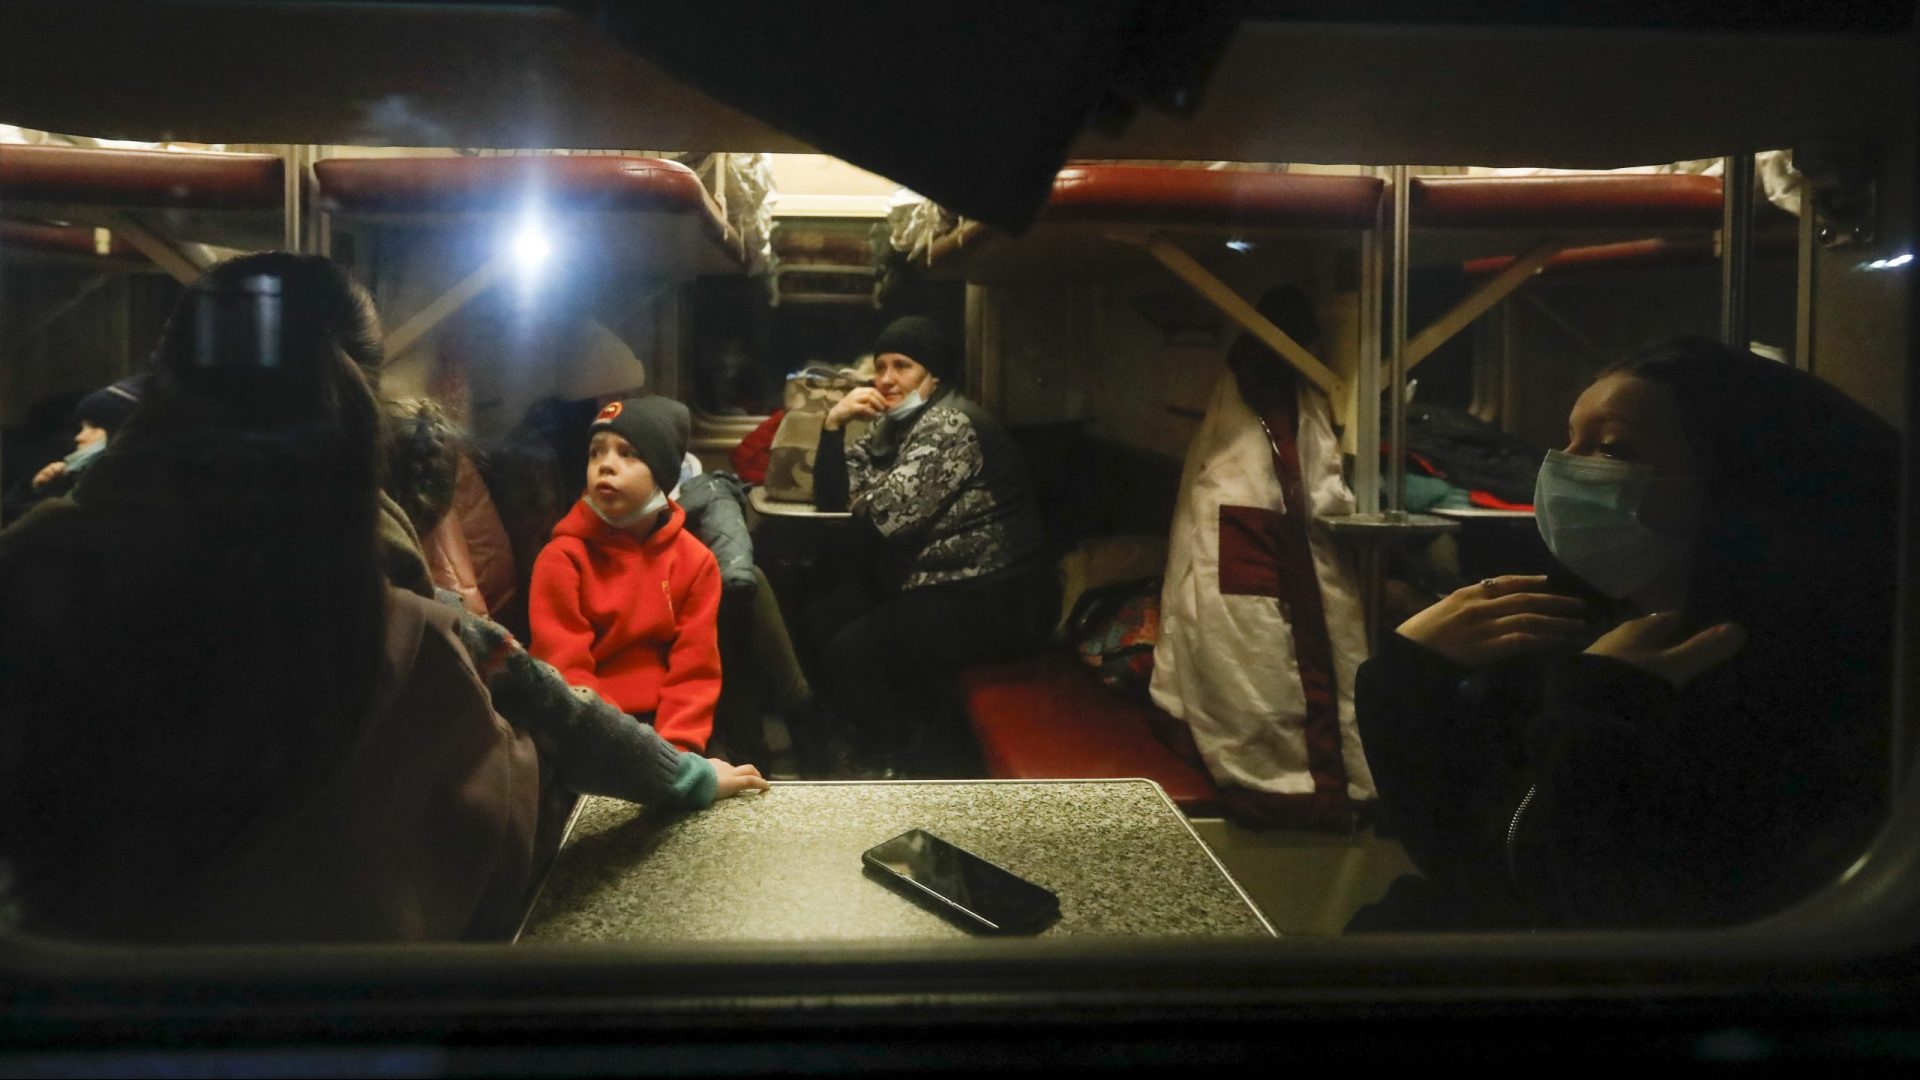 People from the Donetsk and Luhansk regions, the territory controlled by a pro-Russia separatist governments in eastern Ukraine, sit a train carriage waiting to be taken to temporary residences in the Volgograd region, at the railway station in Volzhsky, Volgograd region, Russia, on Sunday, Feb. 20, 2022.